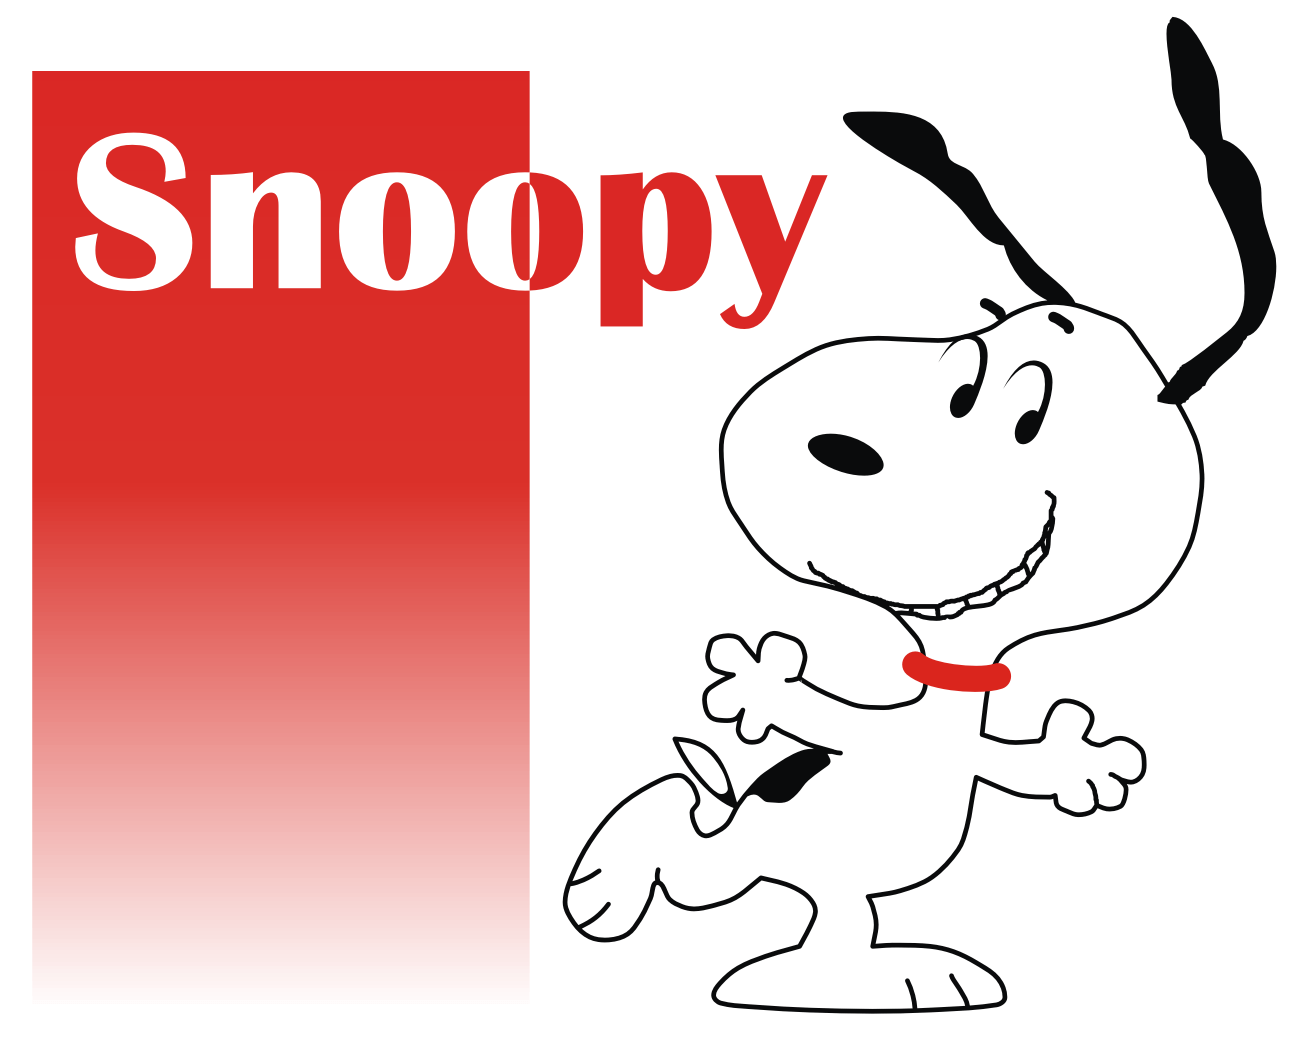 Snoopy Wallpaper.png